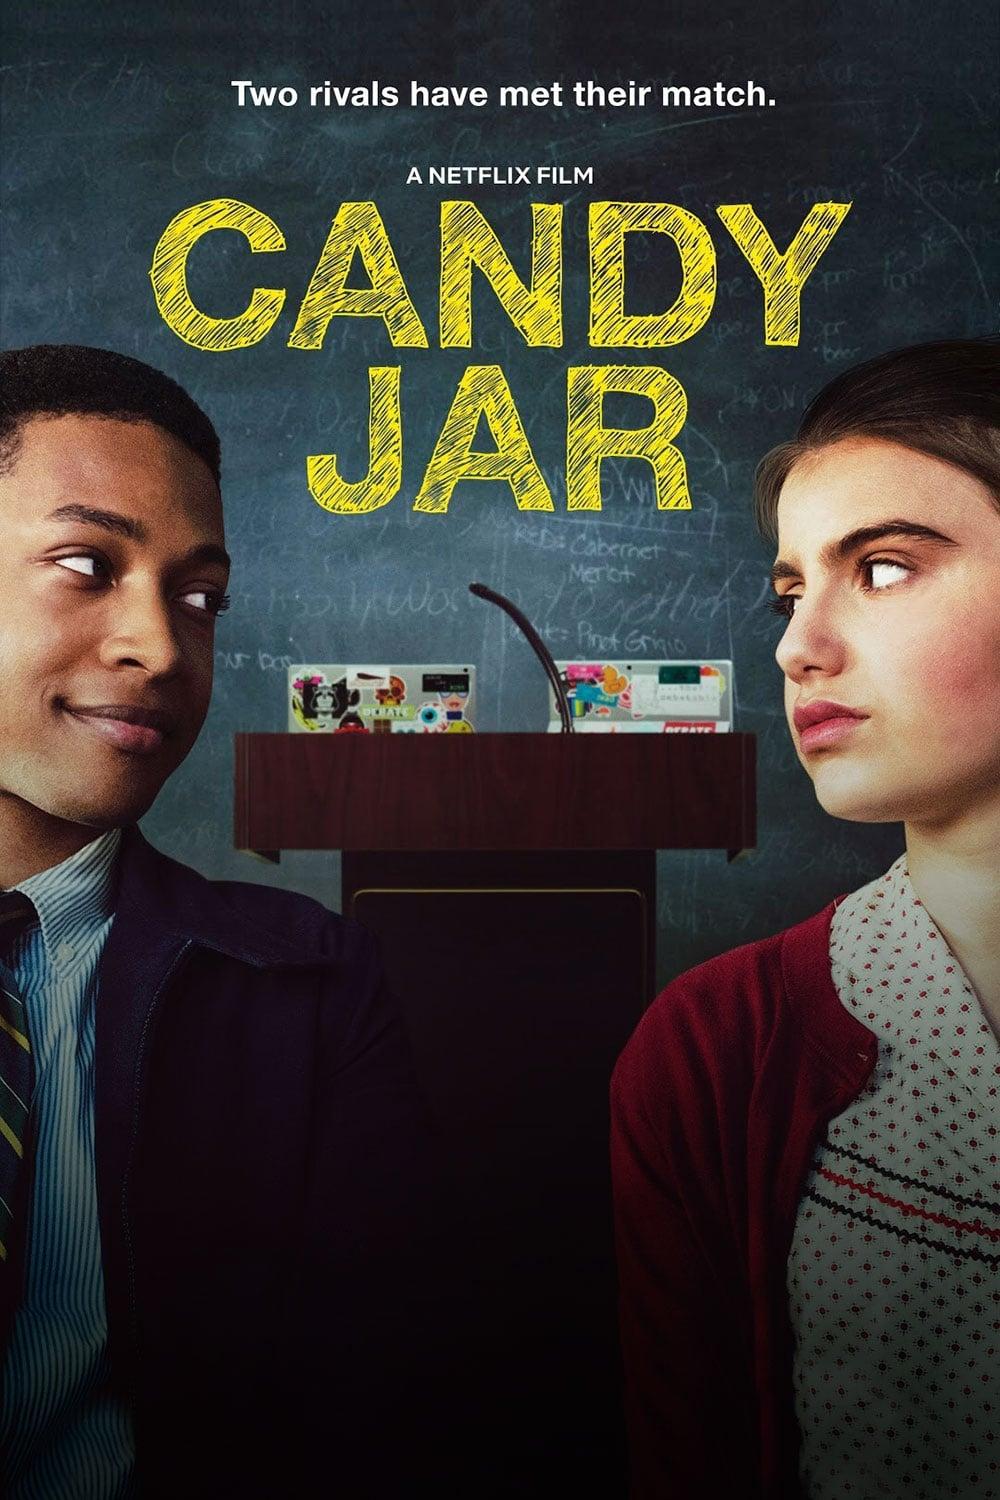 Candy Jar poster